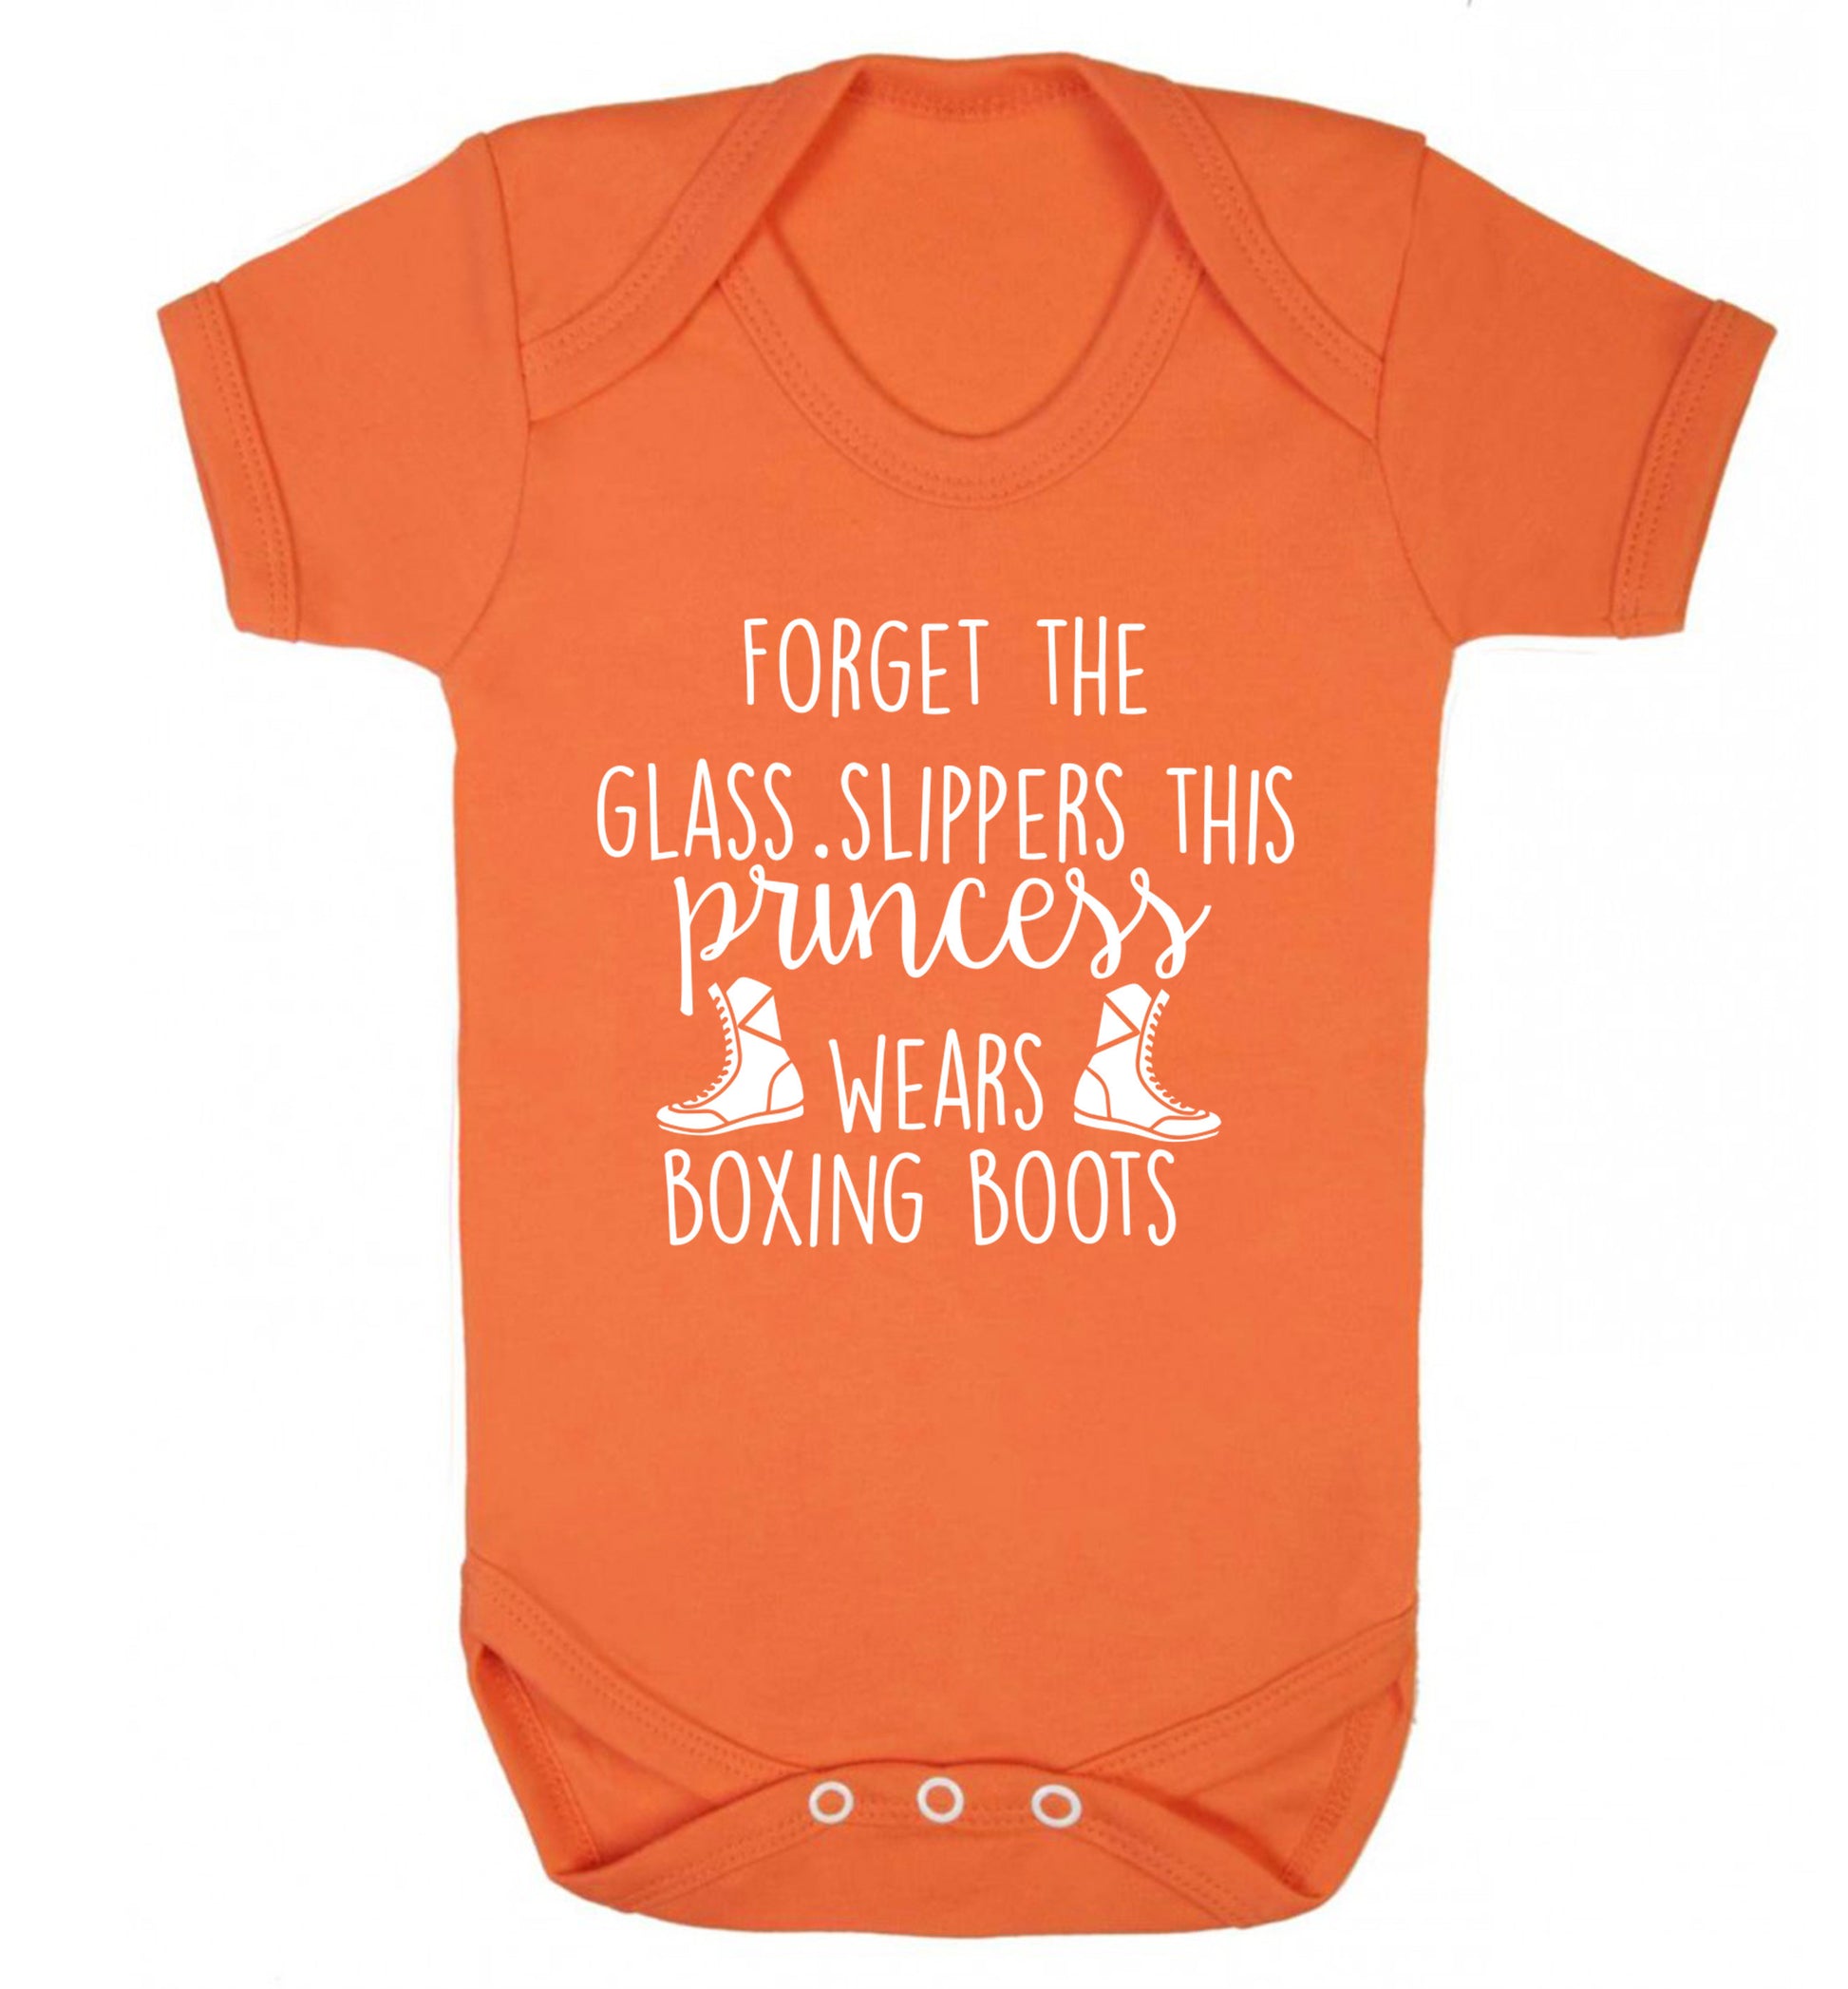 Forget the glass slippers this princess wears boxing boots Baby Vest orange 18-24 months